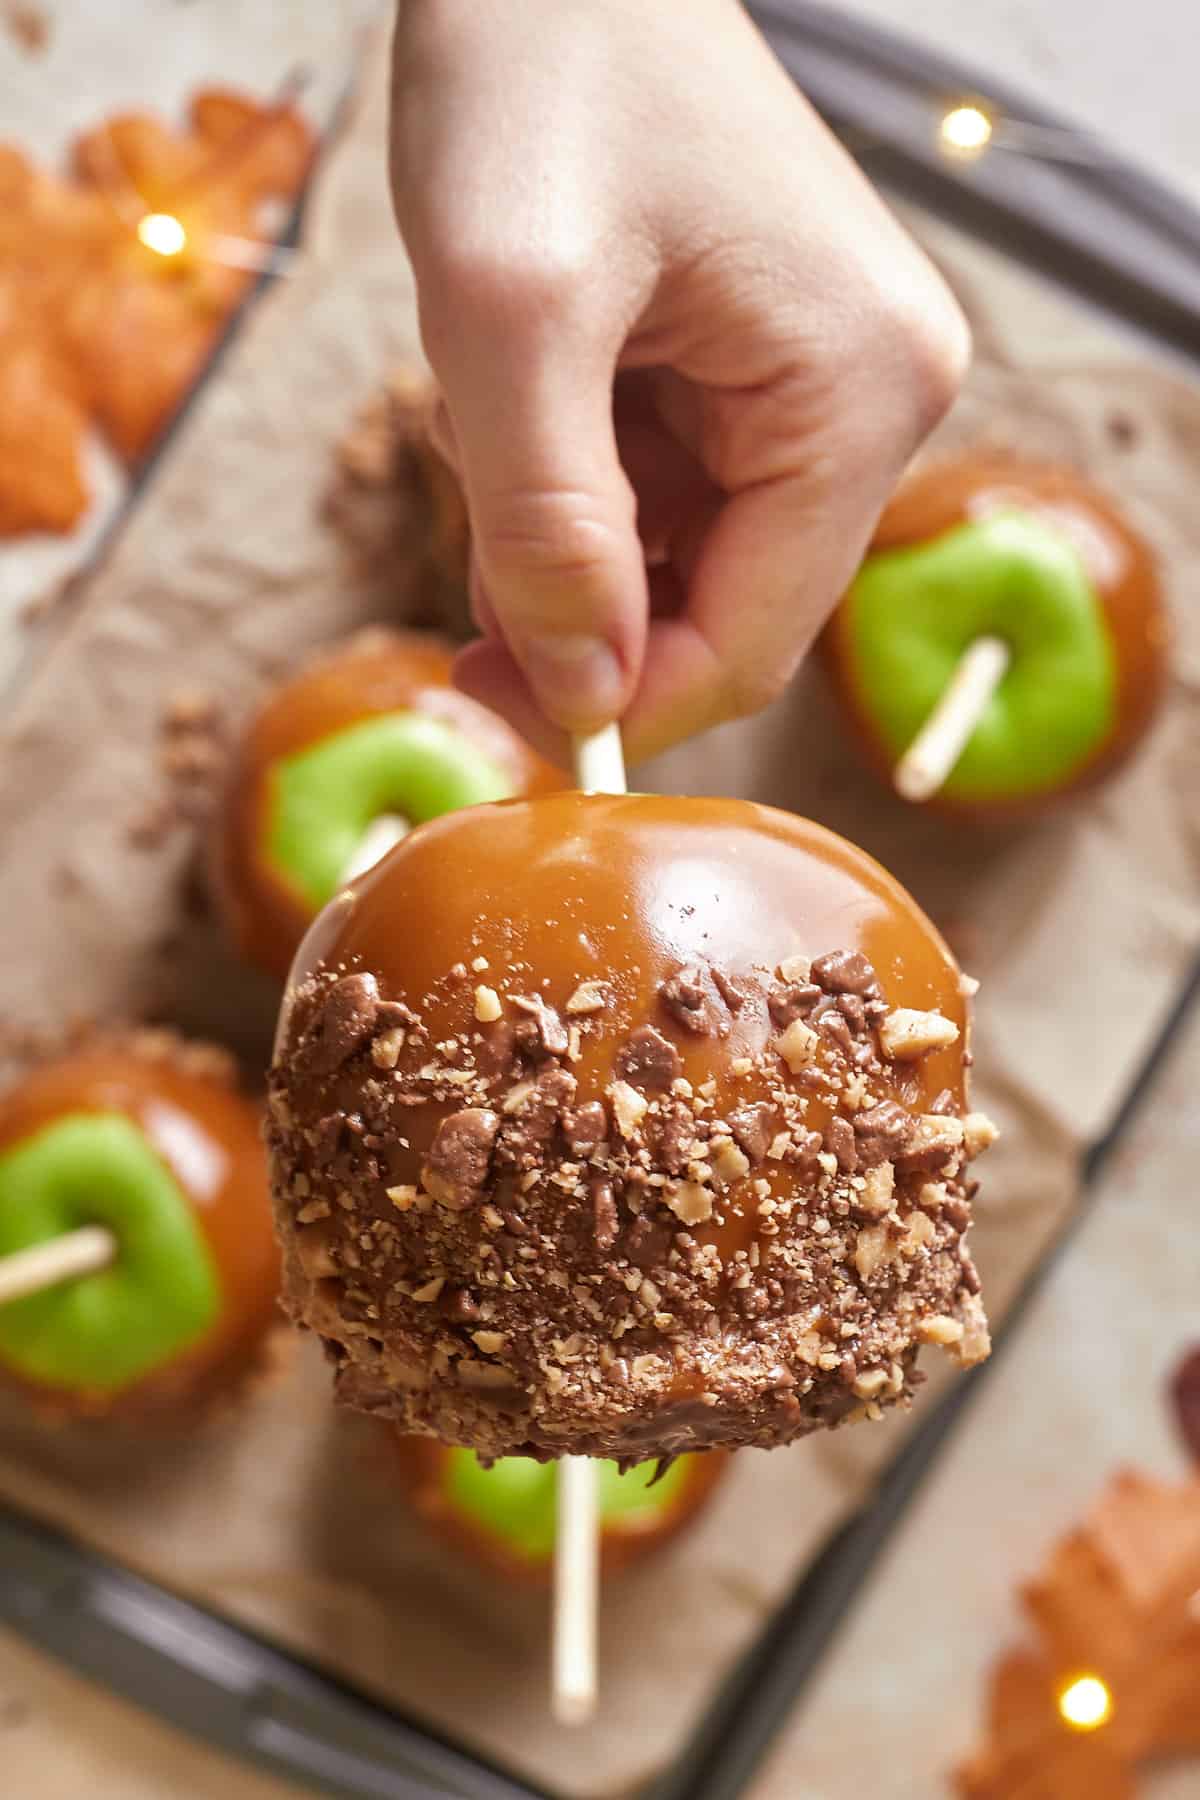 Hand holding a green caramel apple that has been coated in toffee pieces. 